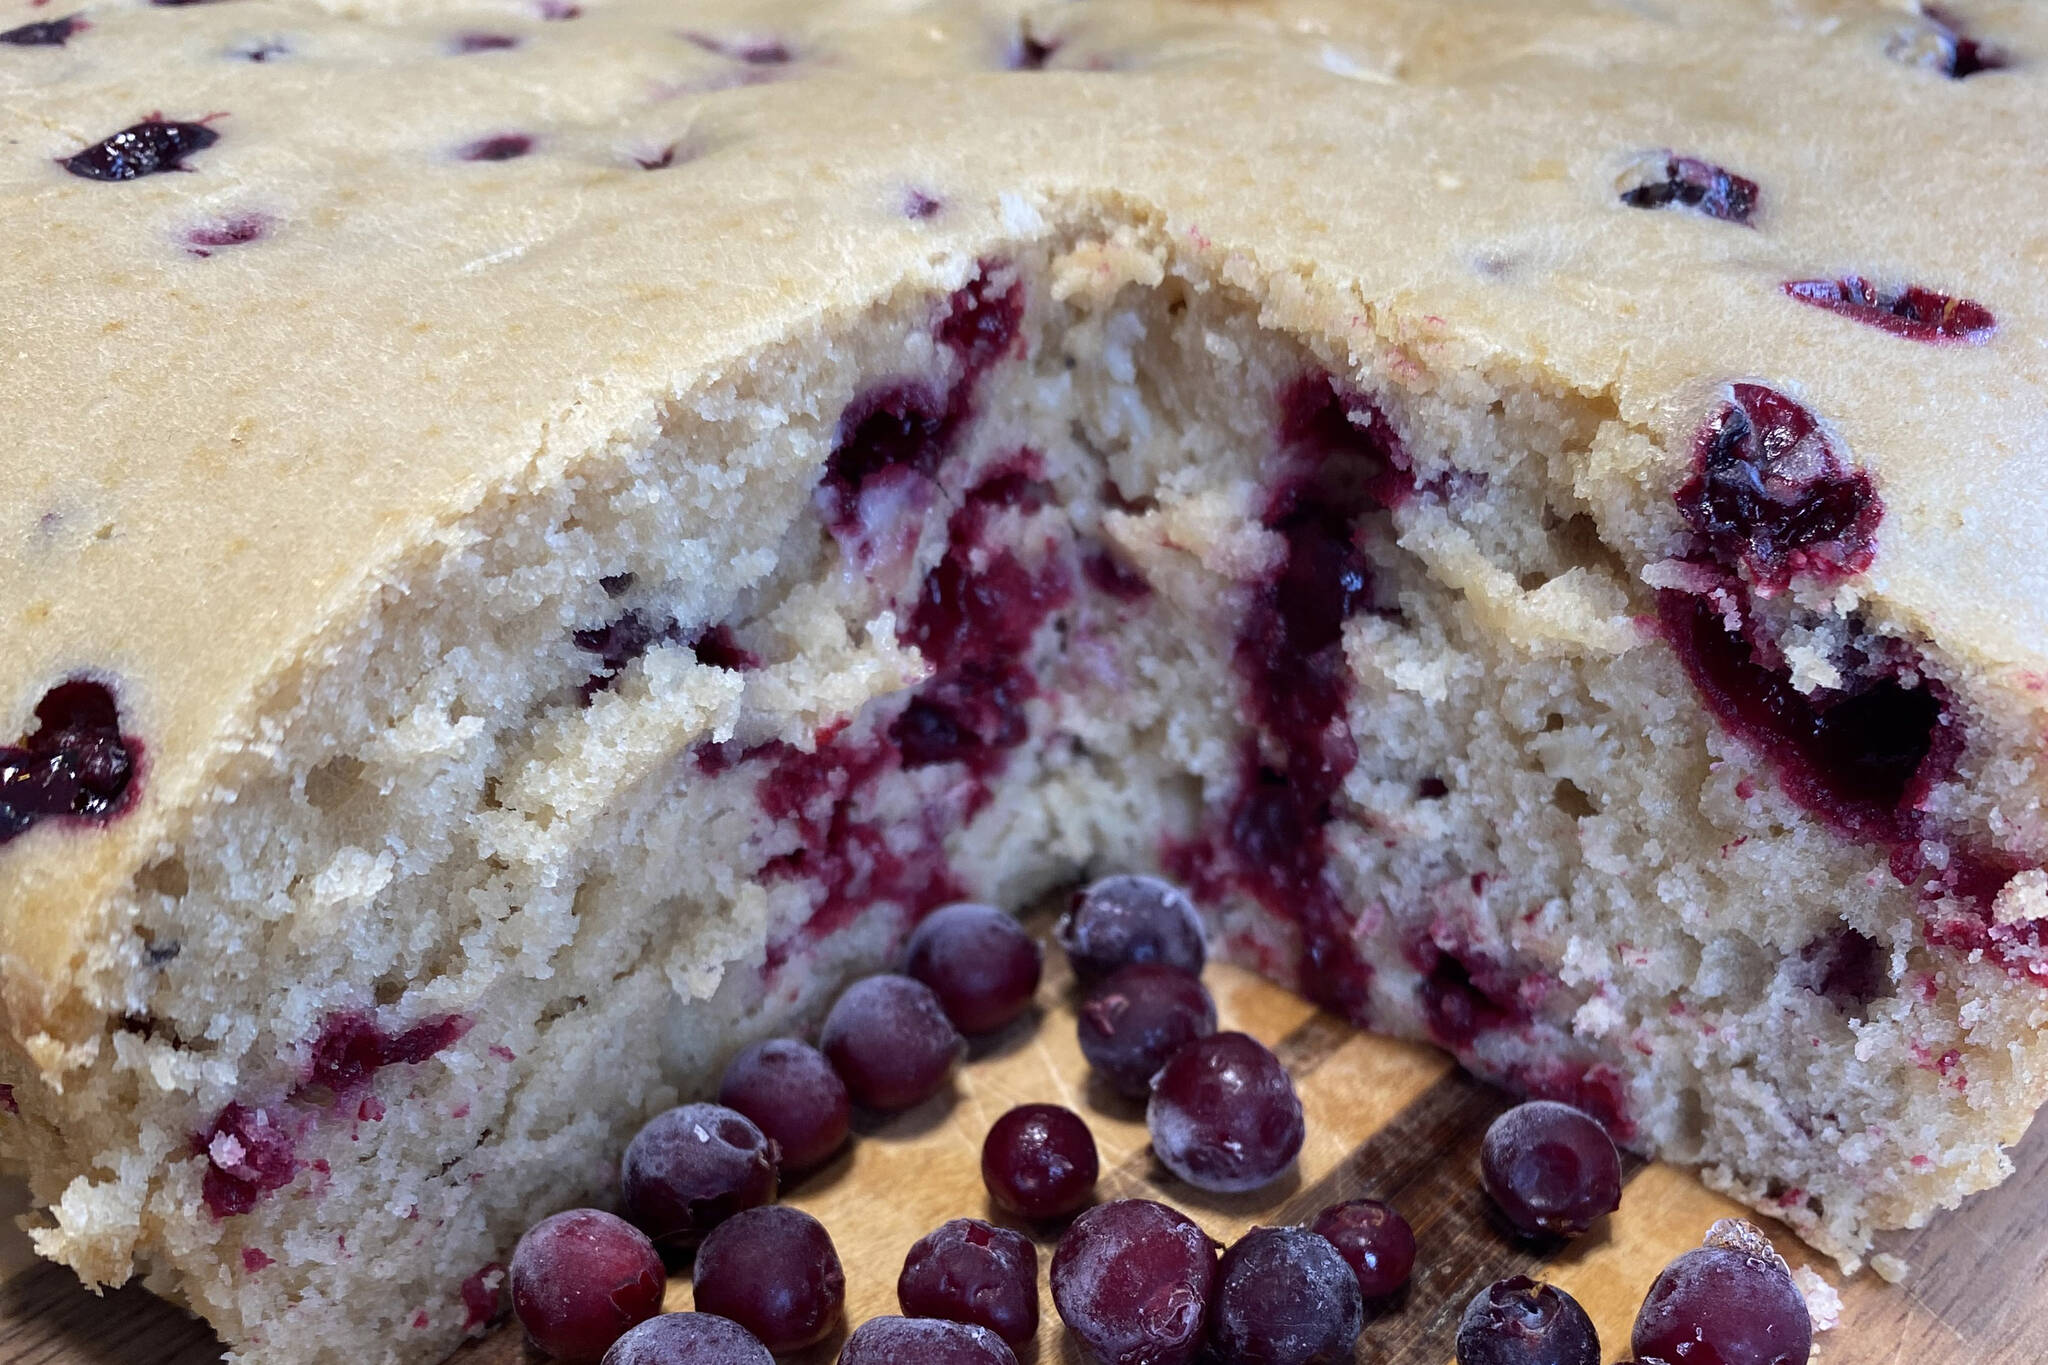 White chocolate cranberry cake is served with fresh cranberries. (Photo by Tressa Dale/Peninsula Clarion)